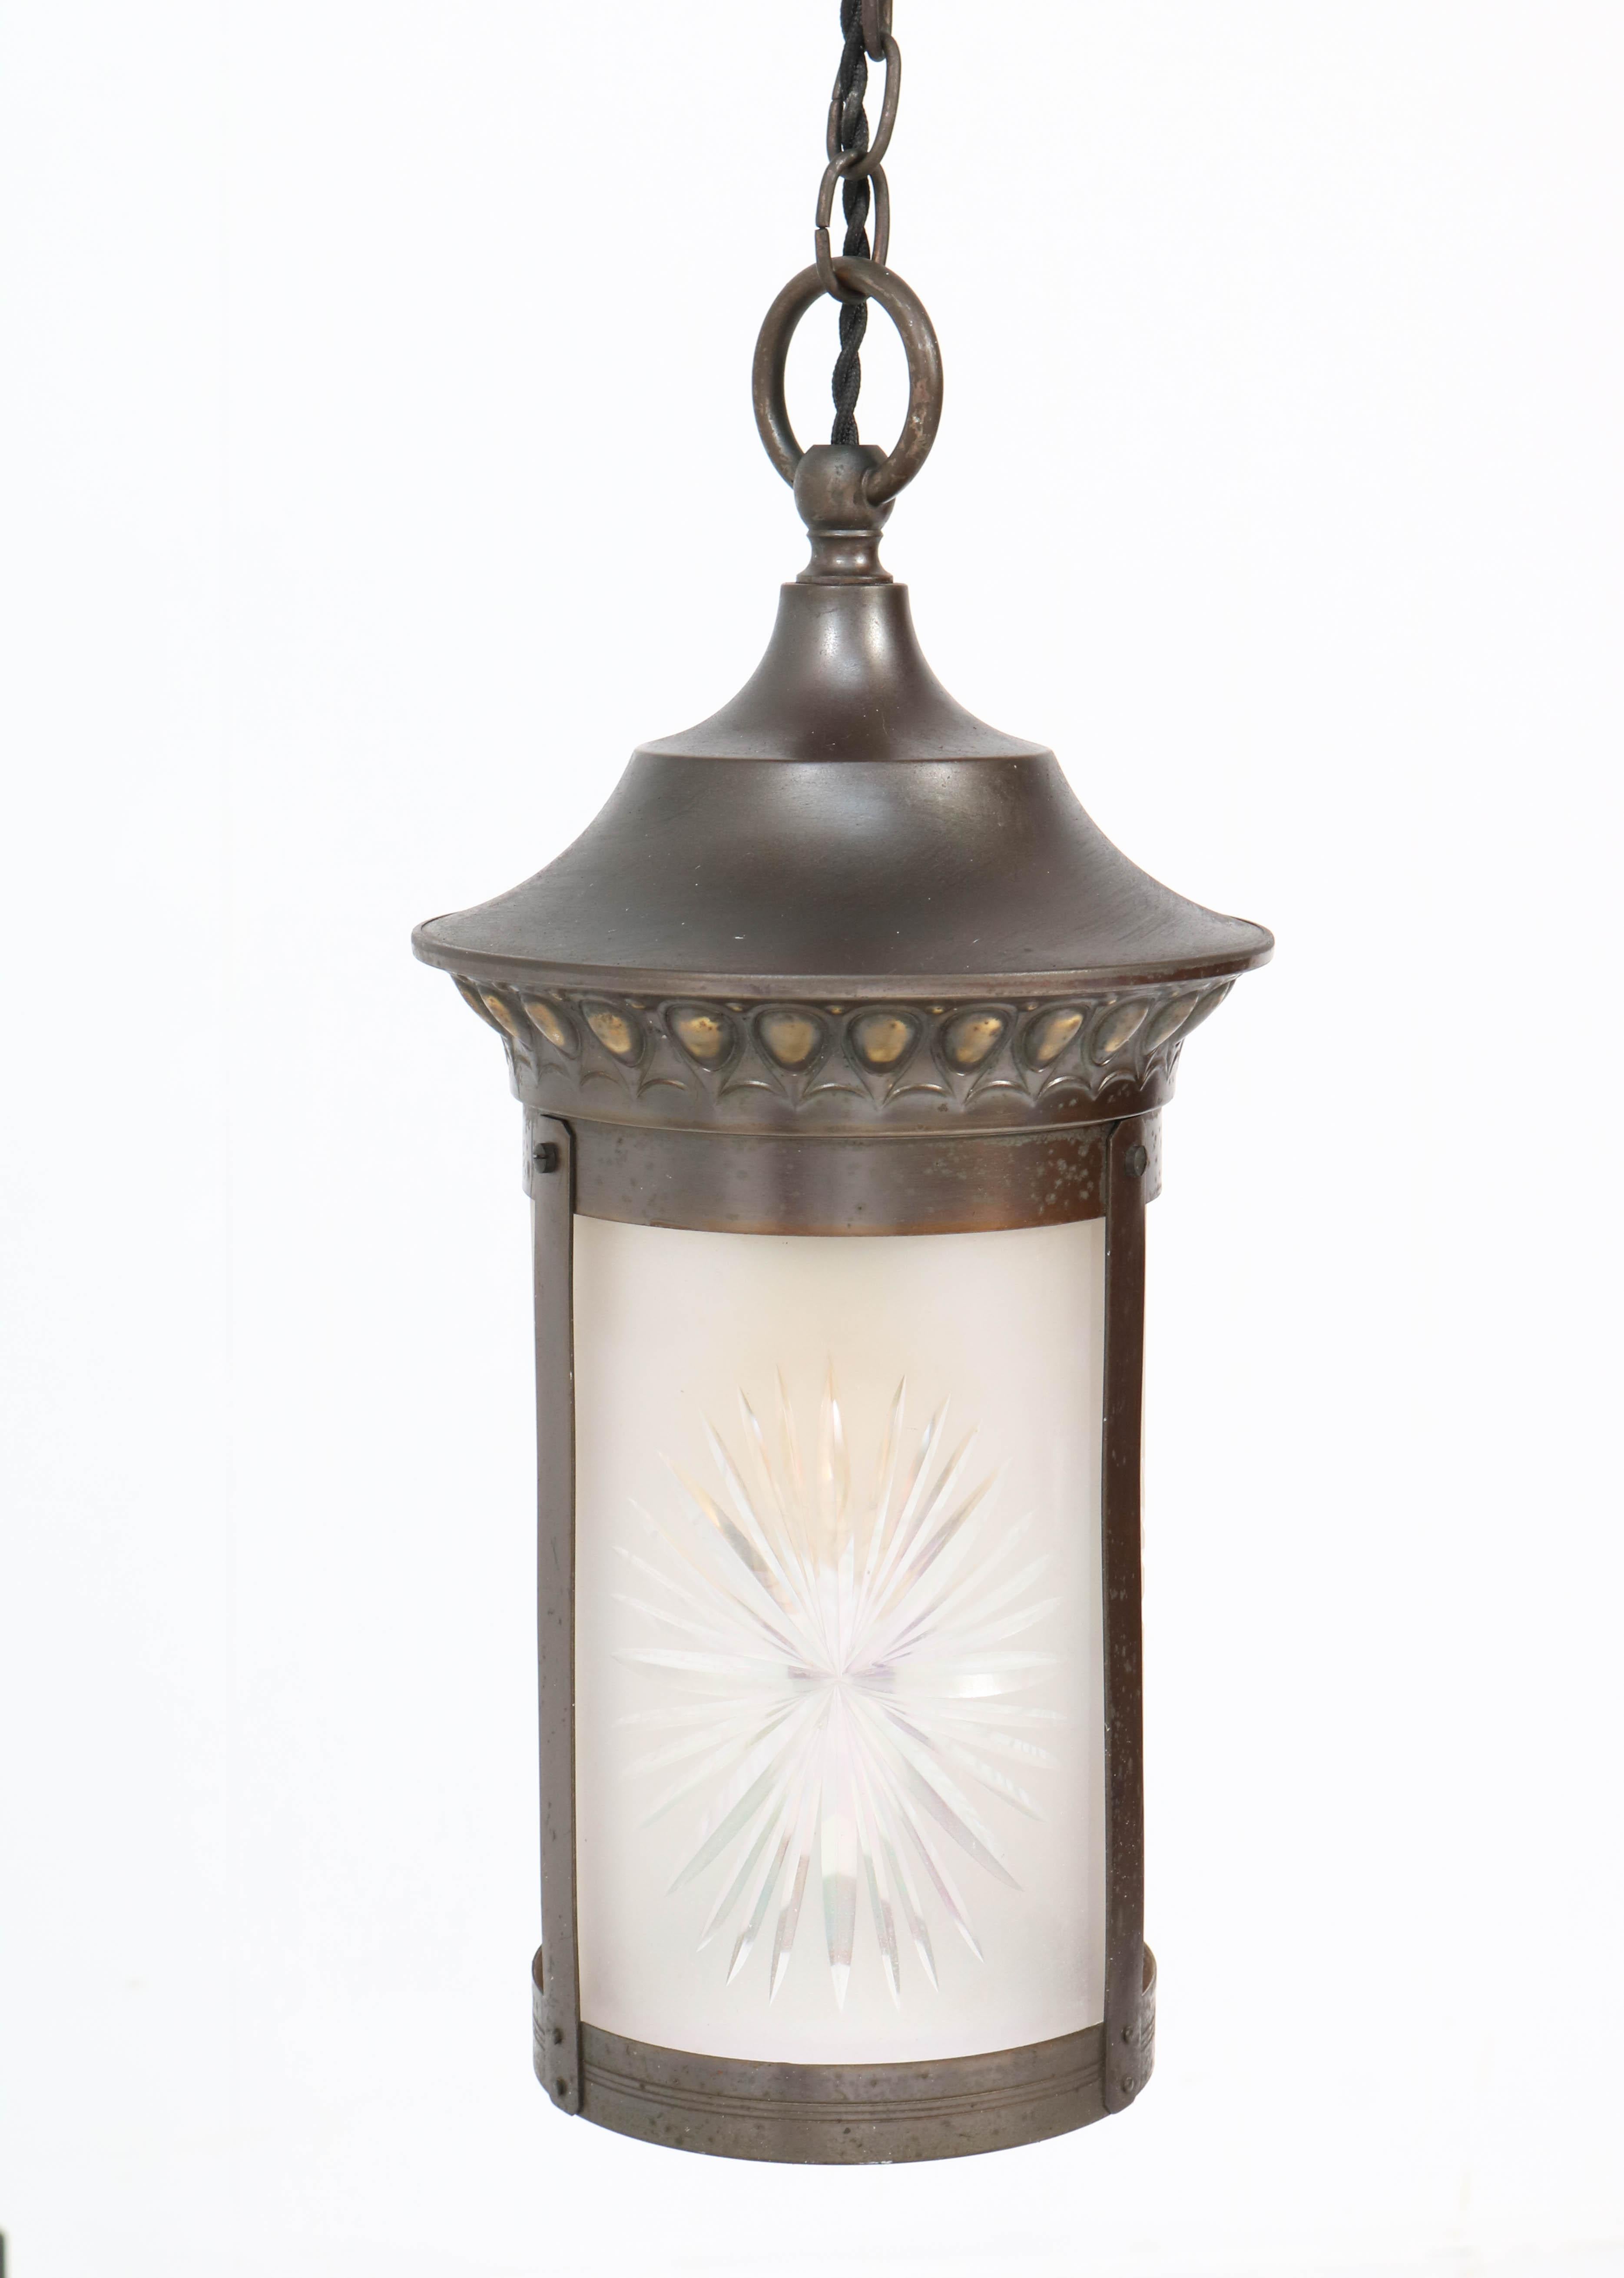 Dutch Patinated Brass Art Nouveau Lantern with Etched Glass, 1900s For Sale